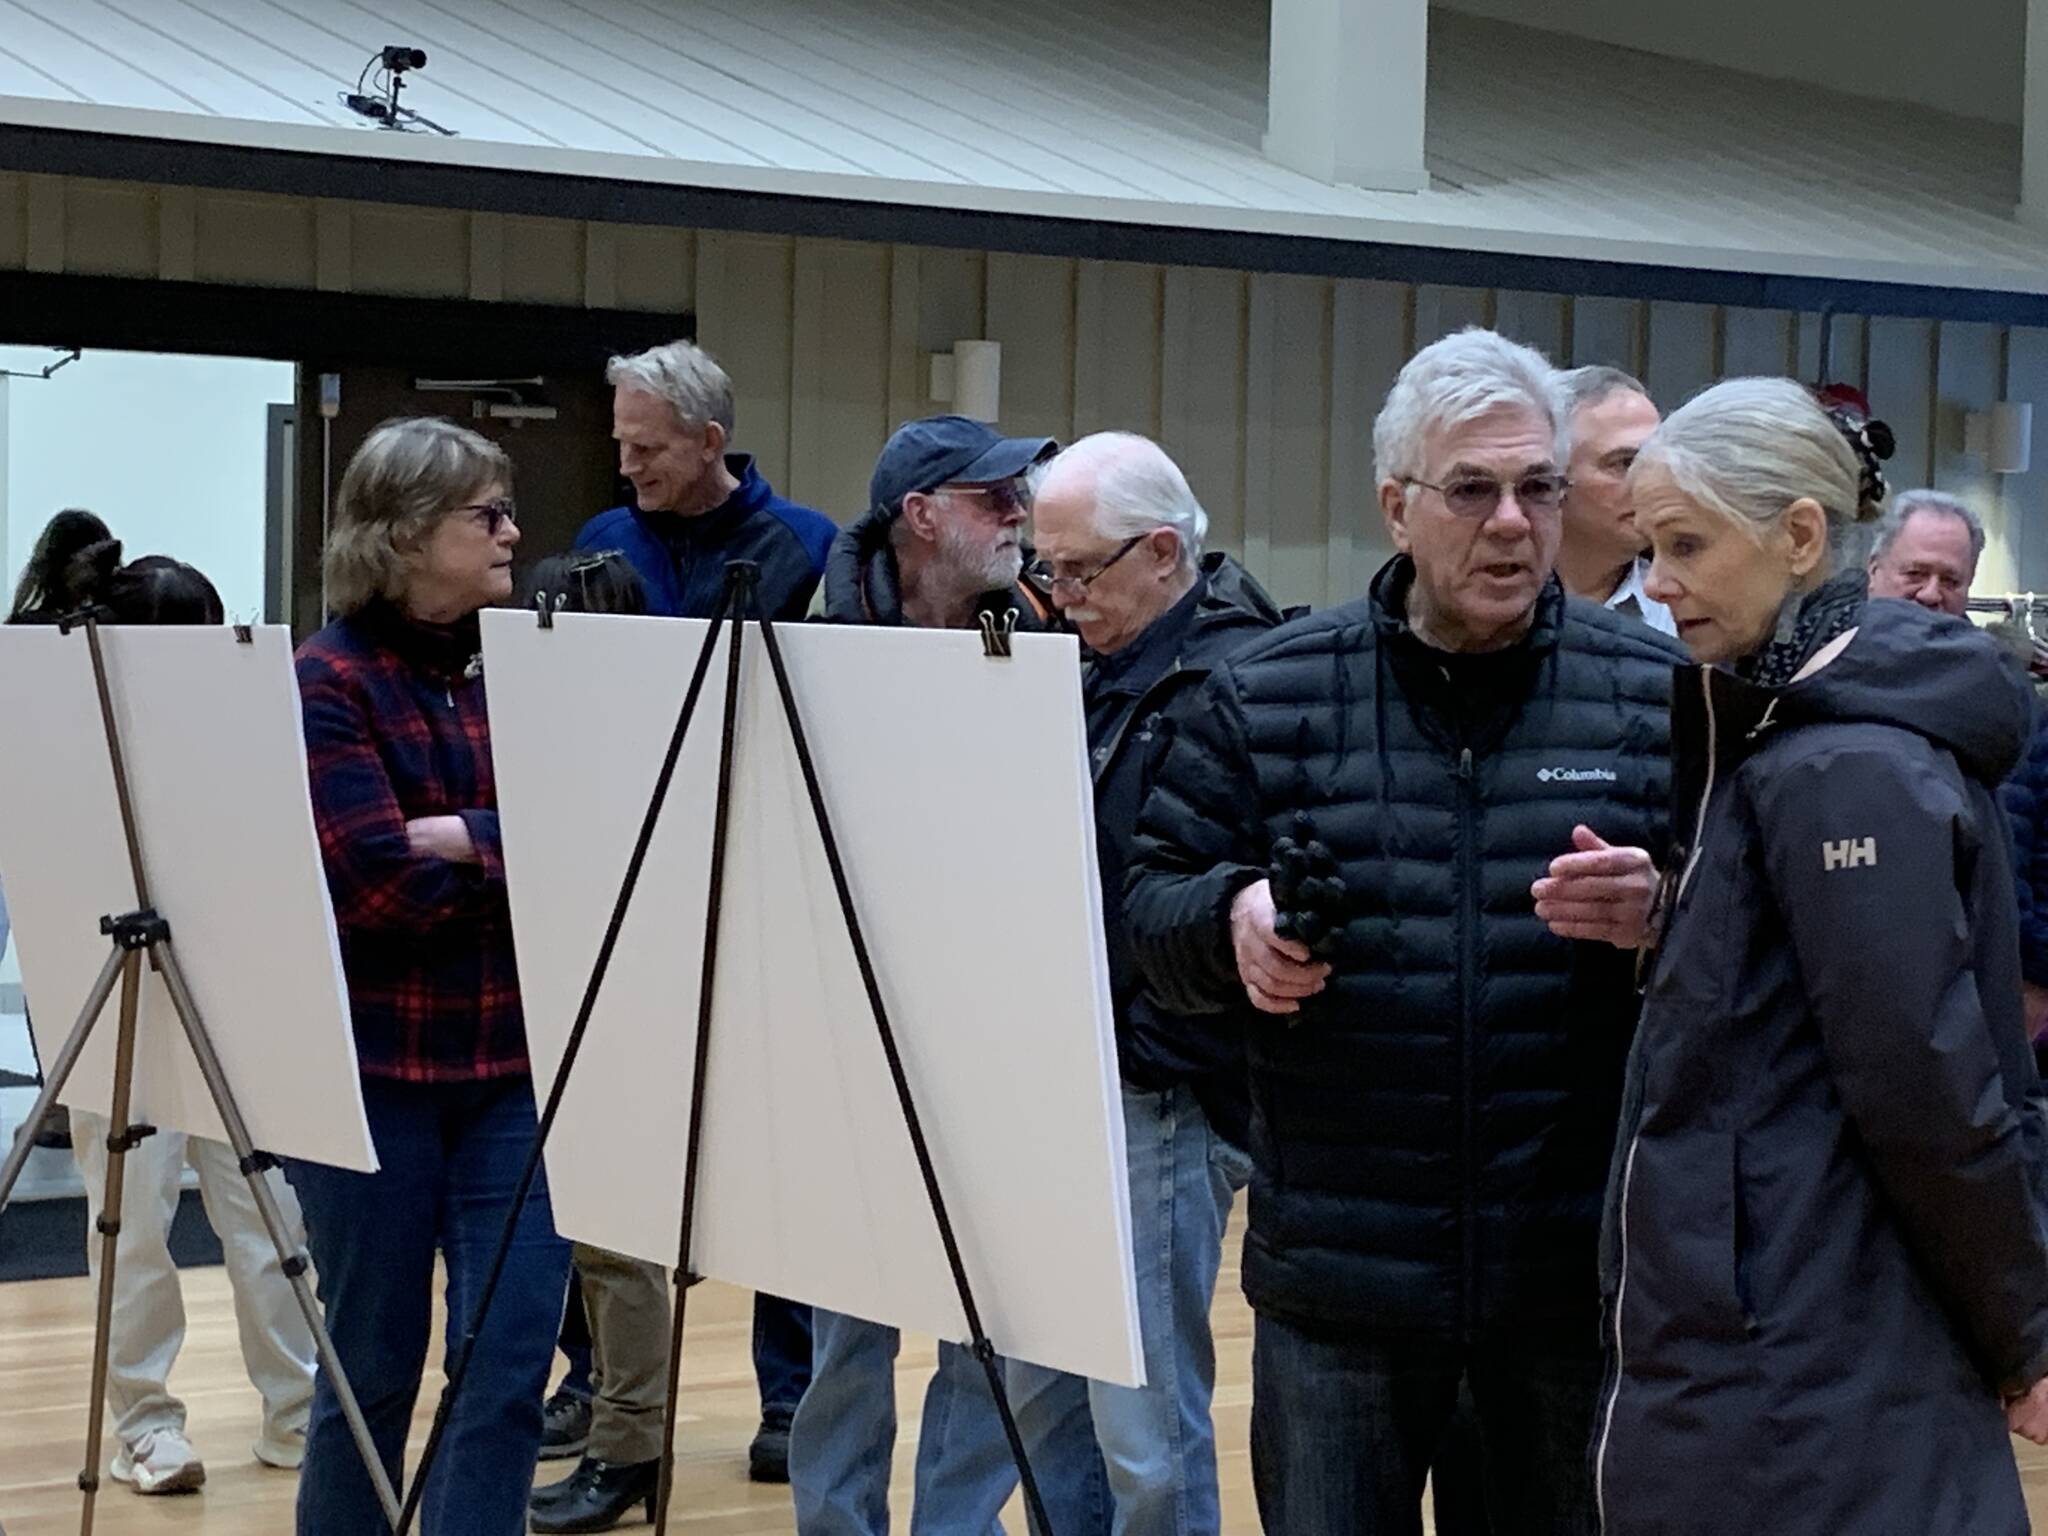 Former councillor John Buckley (second from the right) and dozens of his fellow Harrison Hot Springs residents look over and discuss the updated proposal for development at 511 Lillooet Avenue. Buckley resigned effective immediately on Monday, June 5. (Observer File Photo)